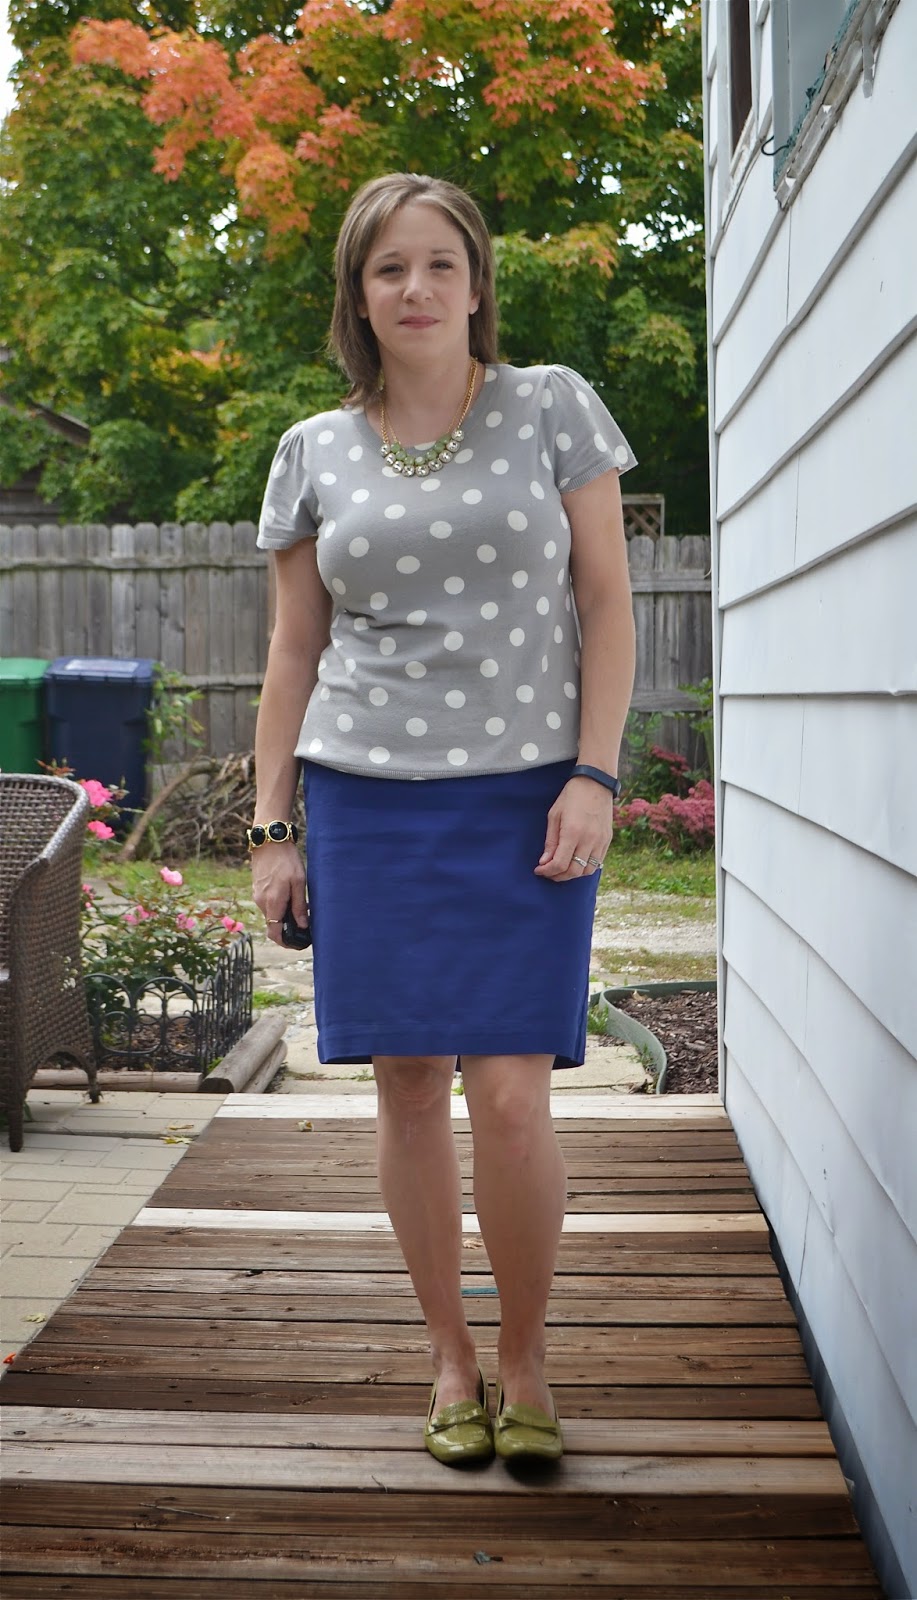 Skirt-Target/Sweater-Old Navy/Shoes-Kenneth Cole/Jewelry-Old Navy, Target, ...